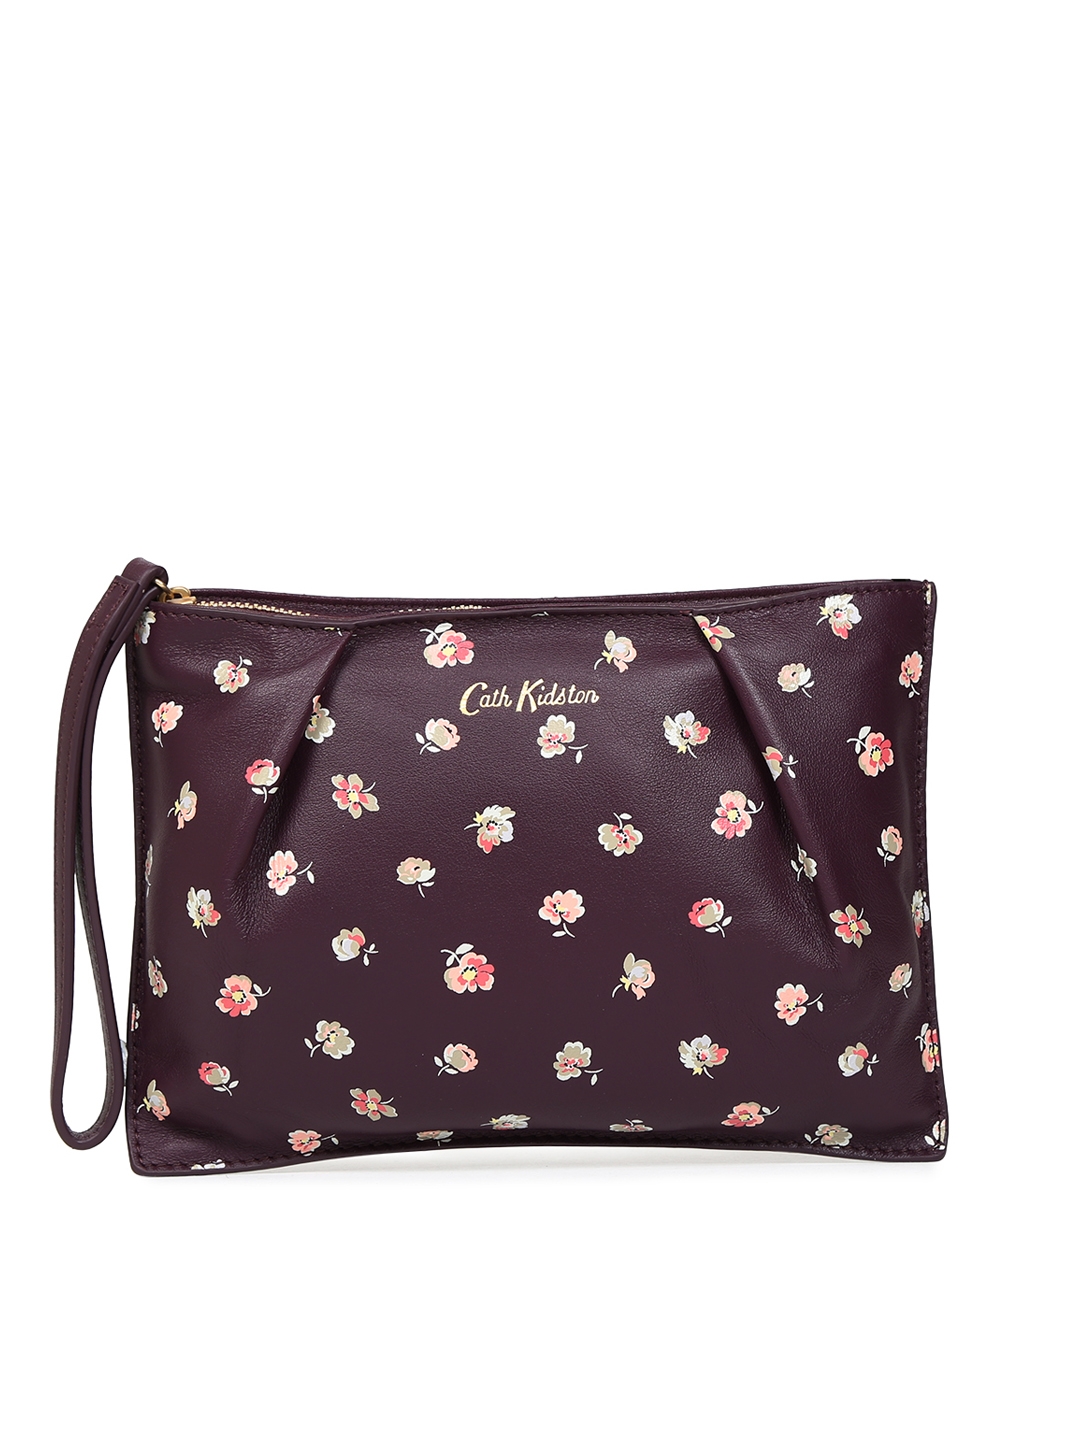 Red rectangular leather purse with Flowers print